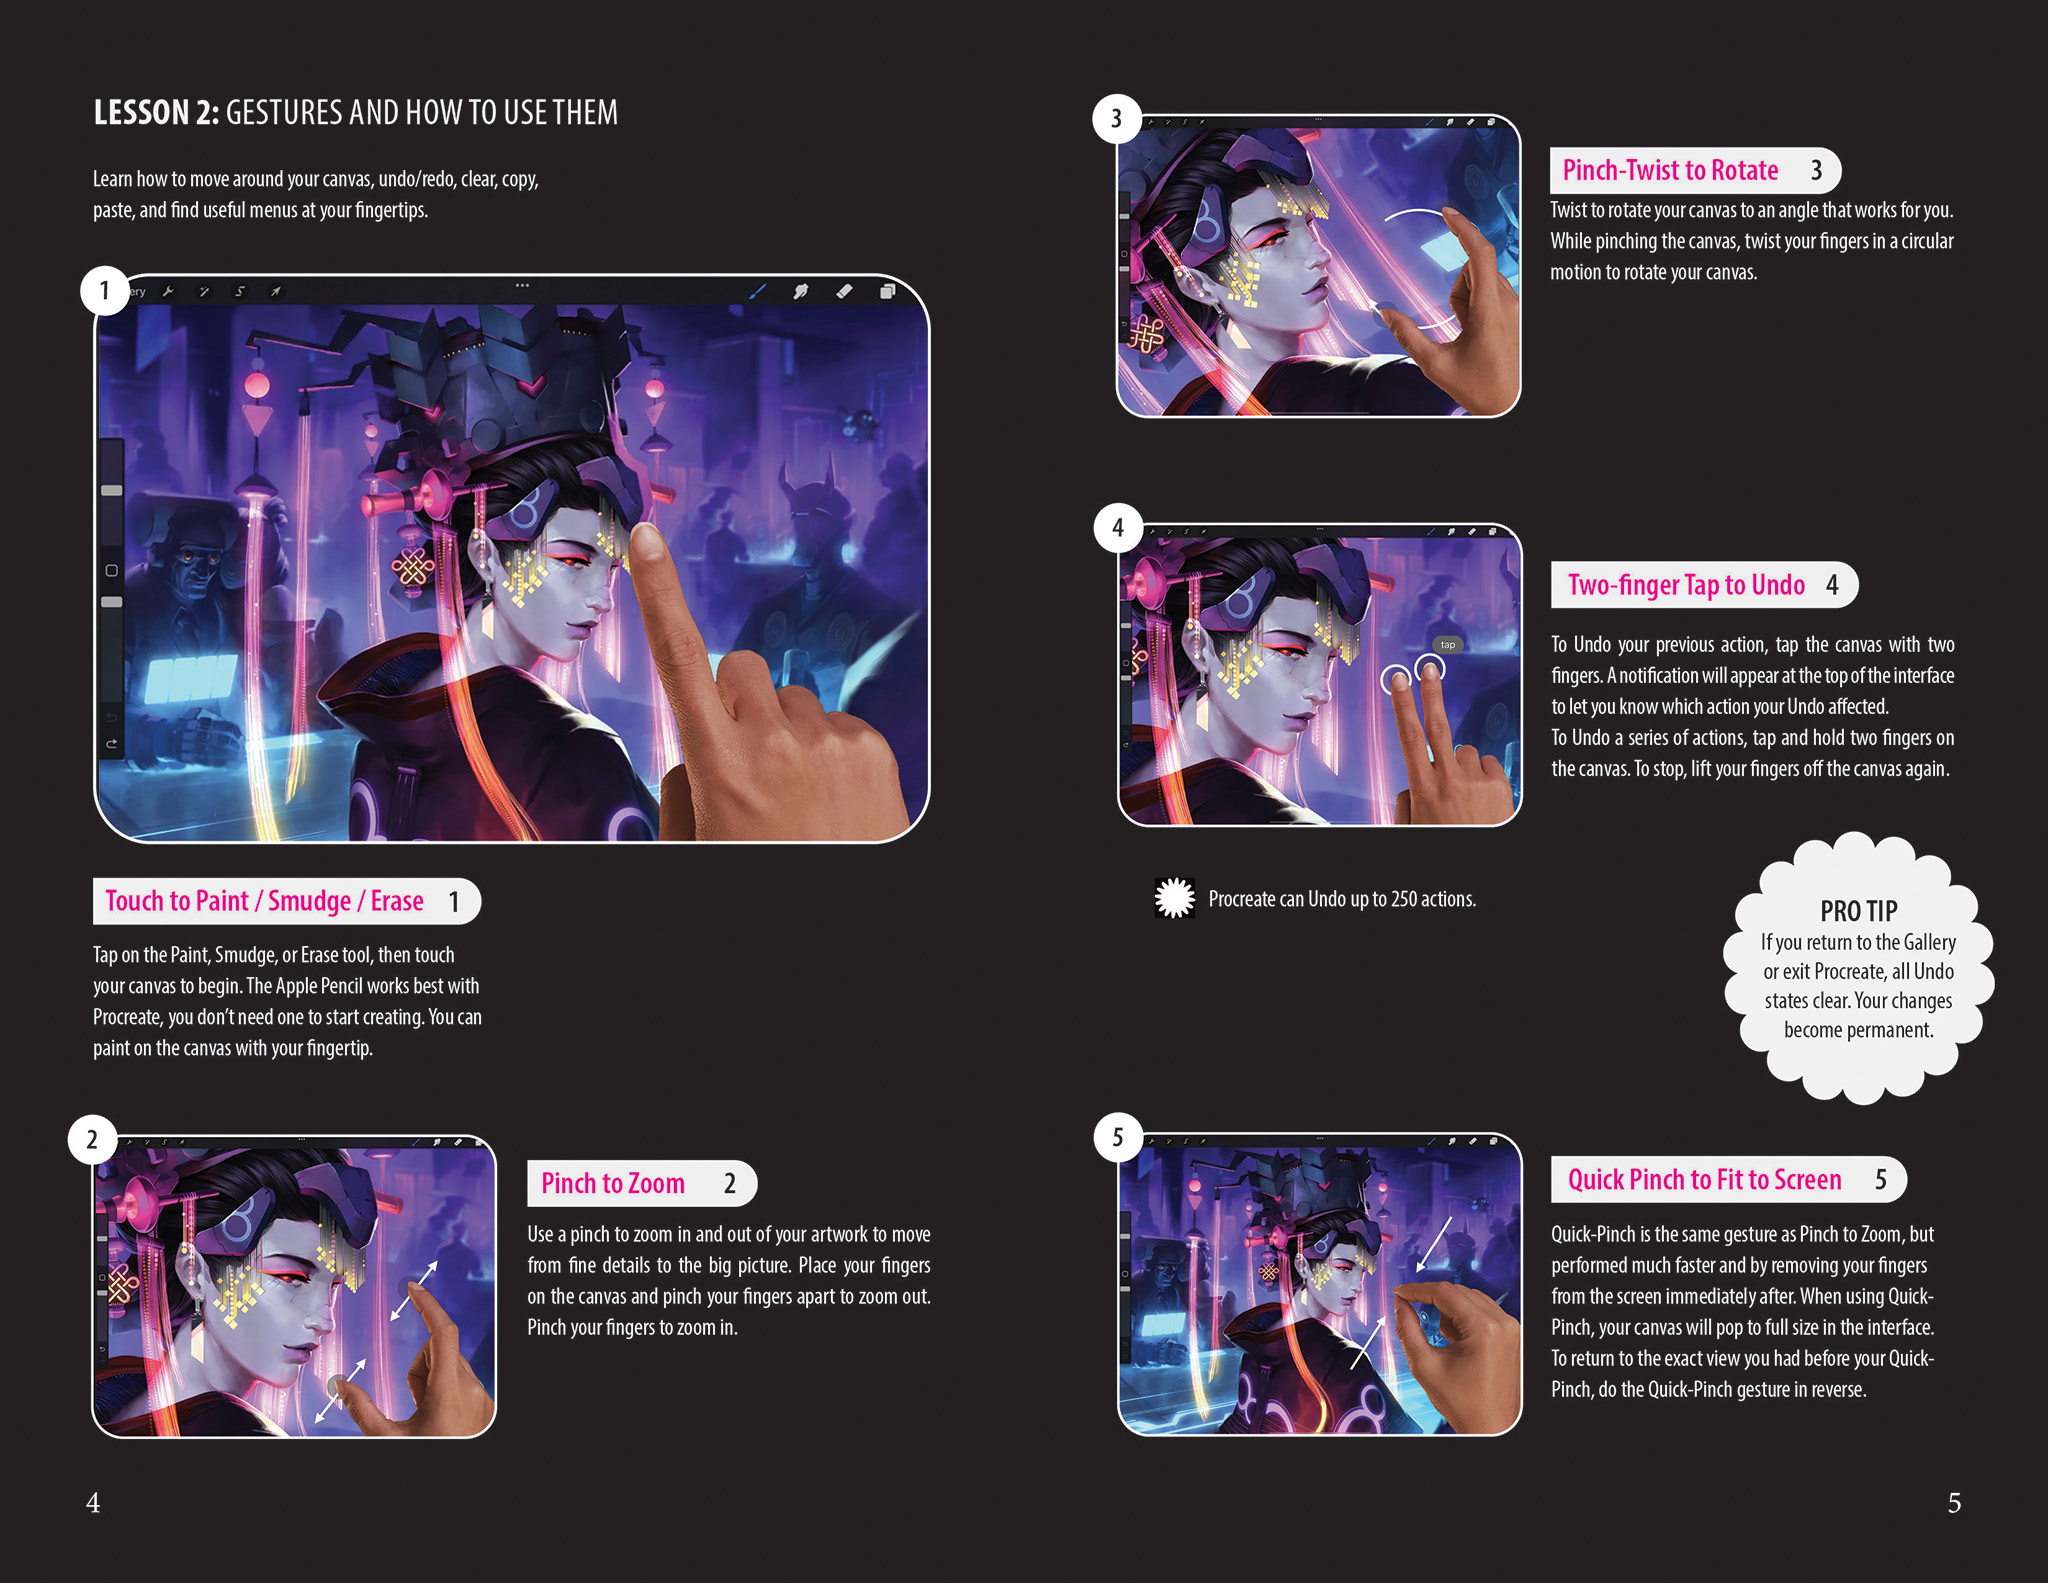 This is an image of one of the inside spreads of an instruction manual designed for the procreate app on iPad. The colour palette features colourful cool toned imagery on a black background.